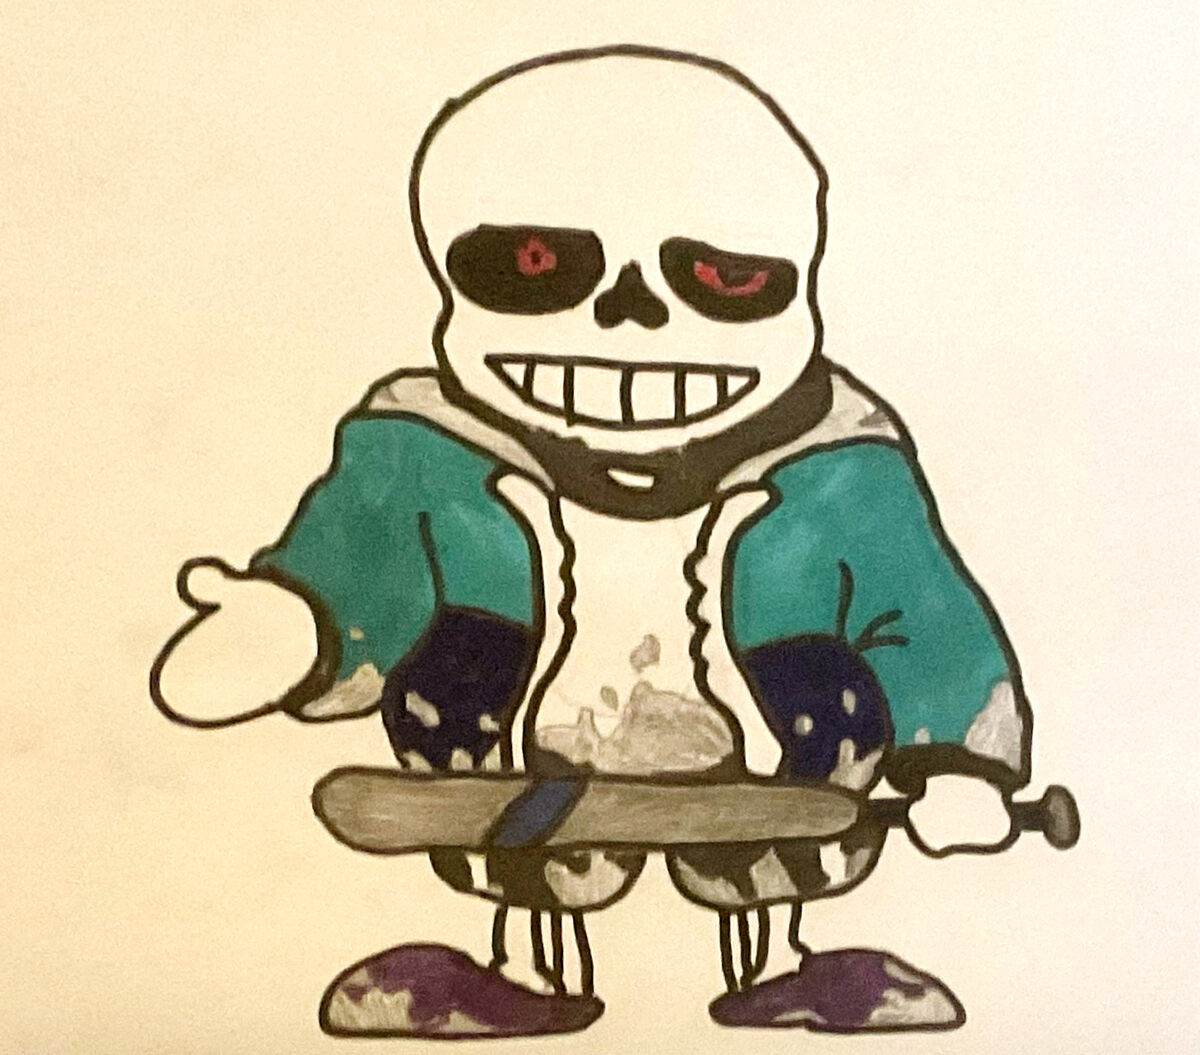 Veloona on X: Murder!Sans I finished this drawing a long time ago, but  somehow i never posted it anywhere xd #MurderSans #undertale #undertaleAU # sans #dusttale #Dust #DustSans #fanart #art  / X